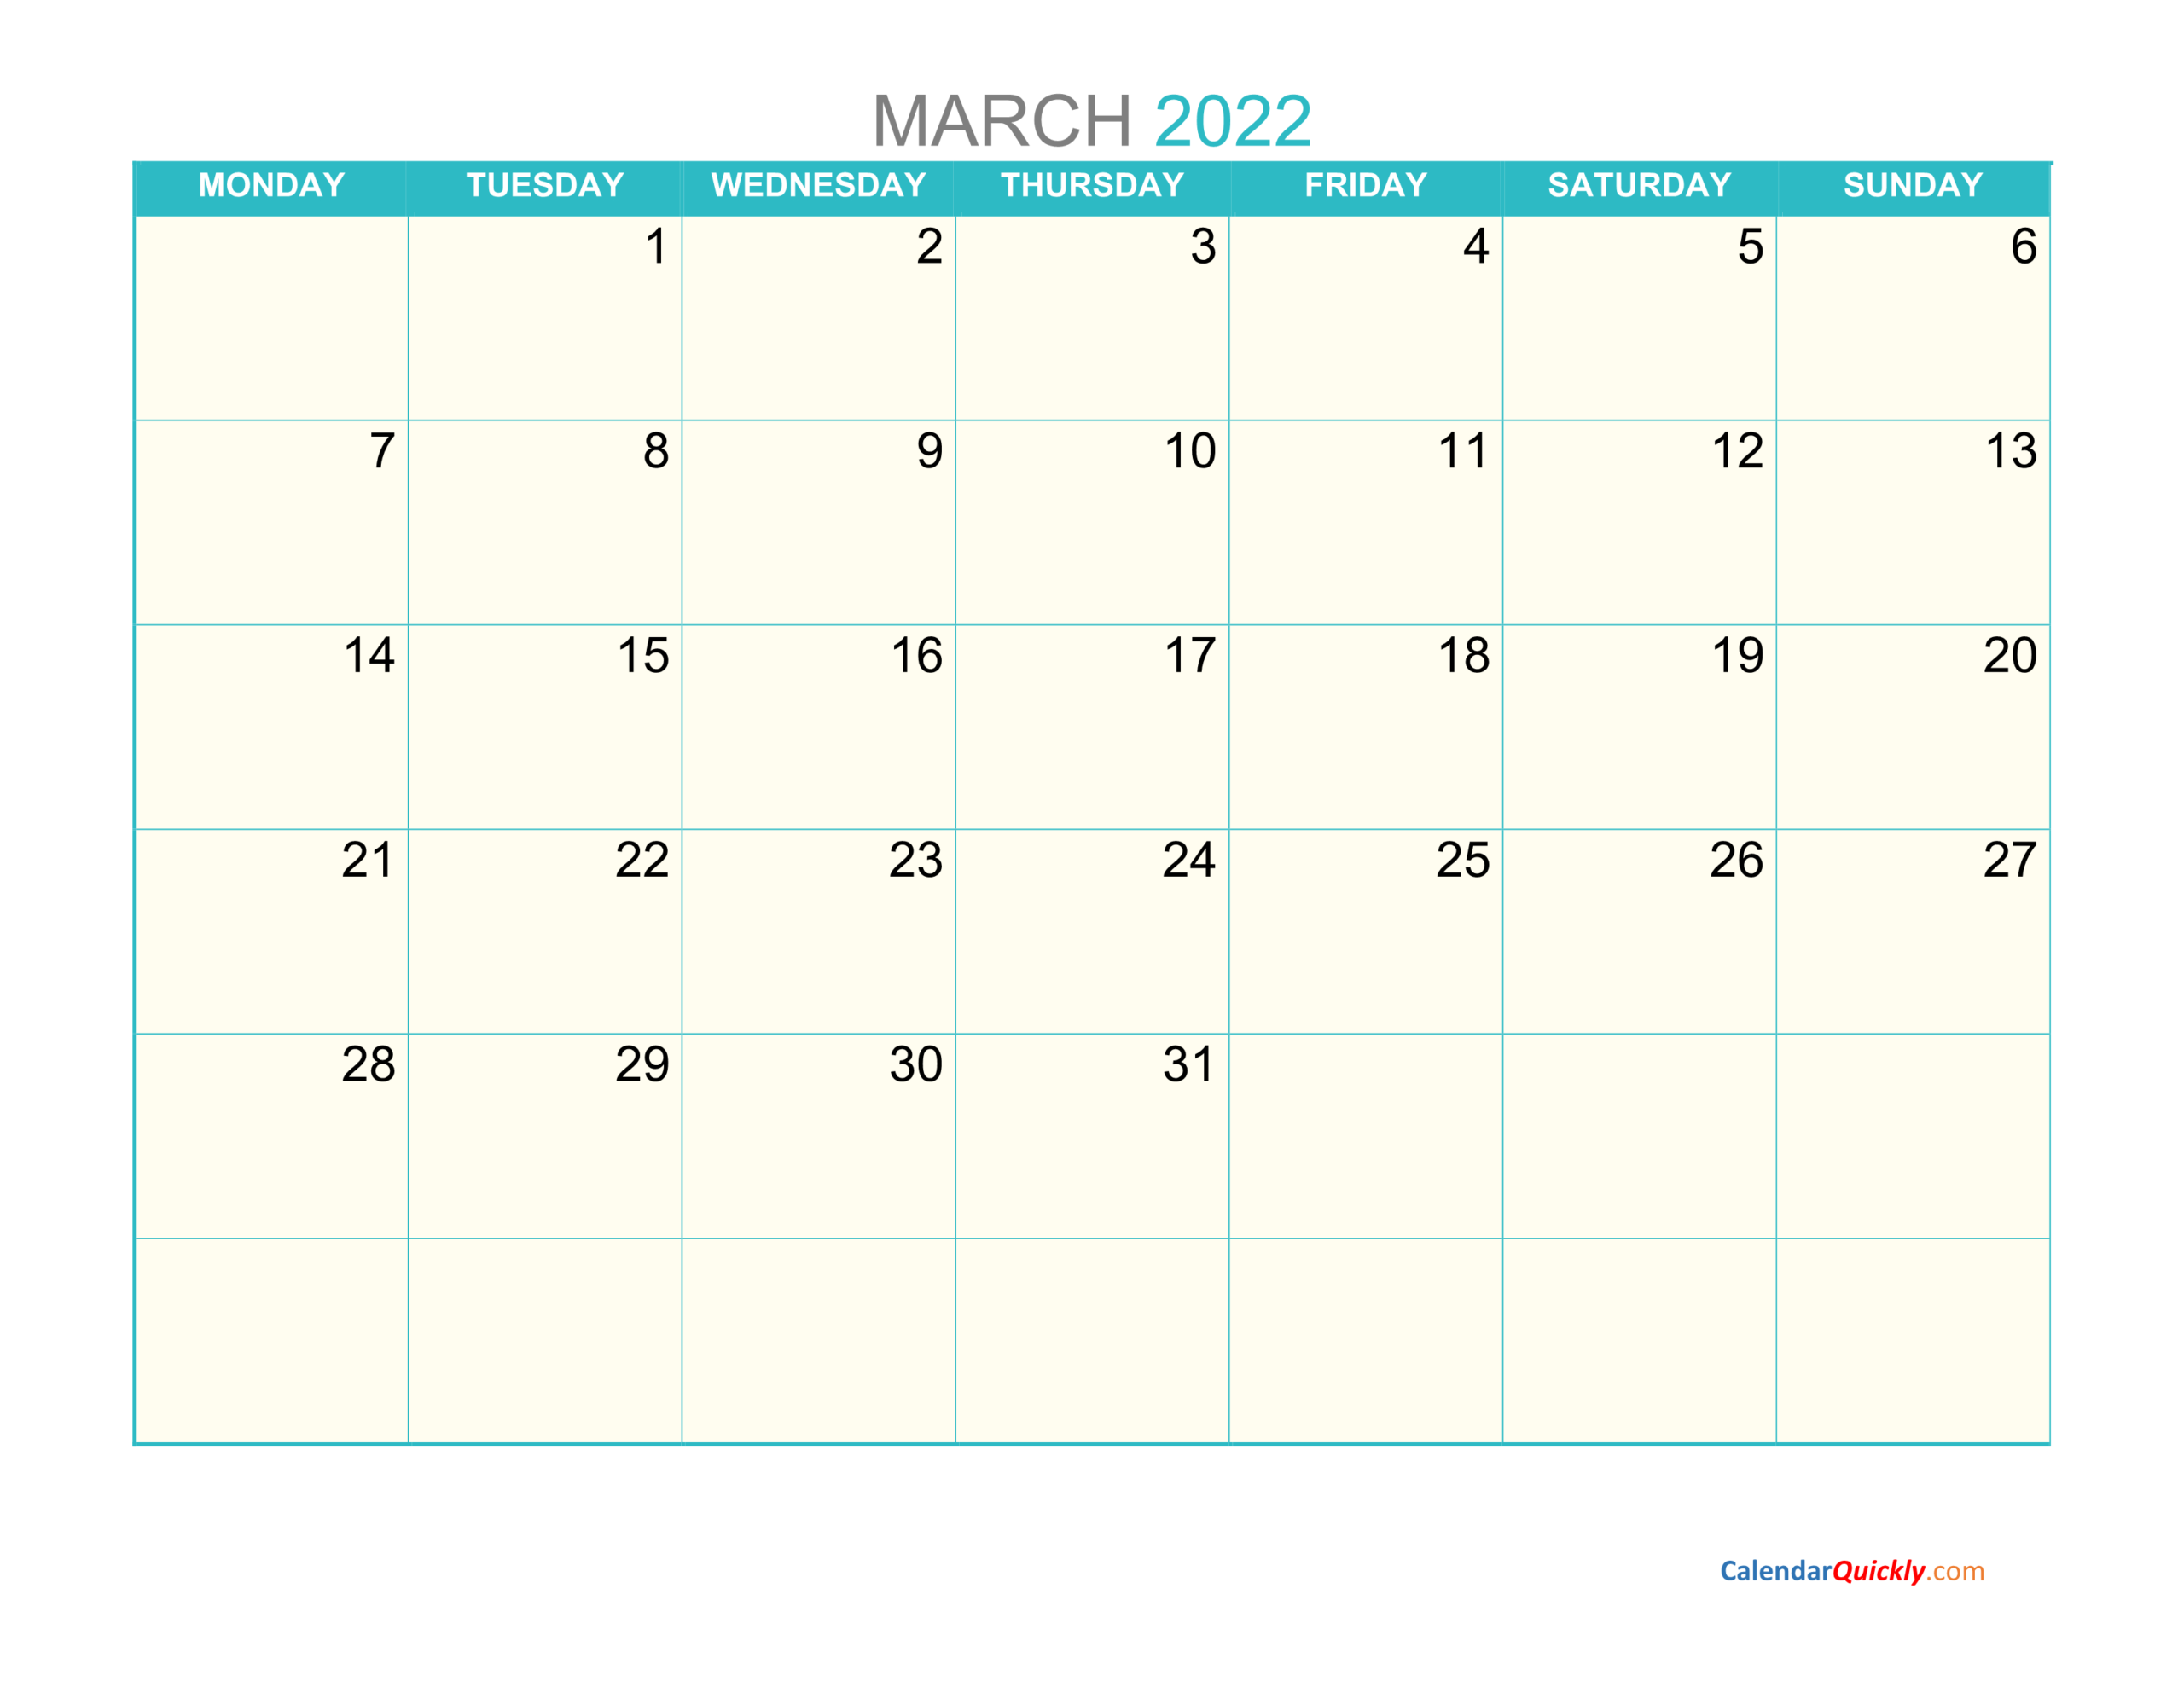 March Monday 2022 Calendar Printable | Calendar Quickly  March And April 2022 Calendar With Holidays